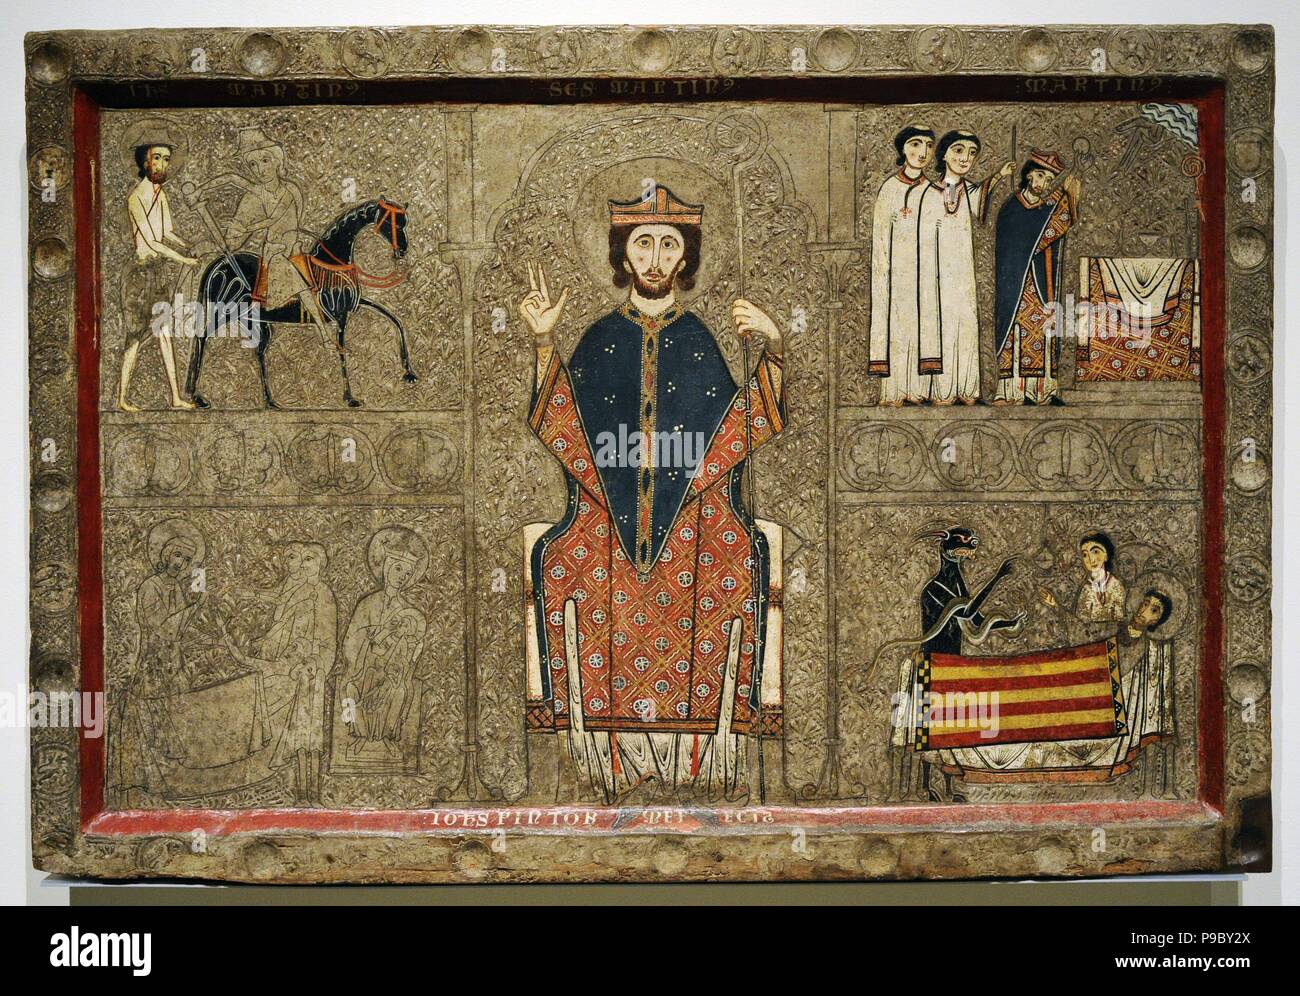 Iohannes. Ribagorza workshop. Altar frontal from Gia, 2nd half of 13th century. From the Church of Sant Marti of Gia, Huesca province. National Art Museum of Catalonia. Barcelona. Catalonia. Spain. Stock Photo